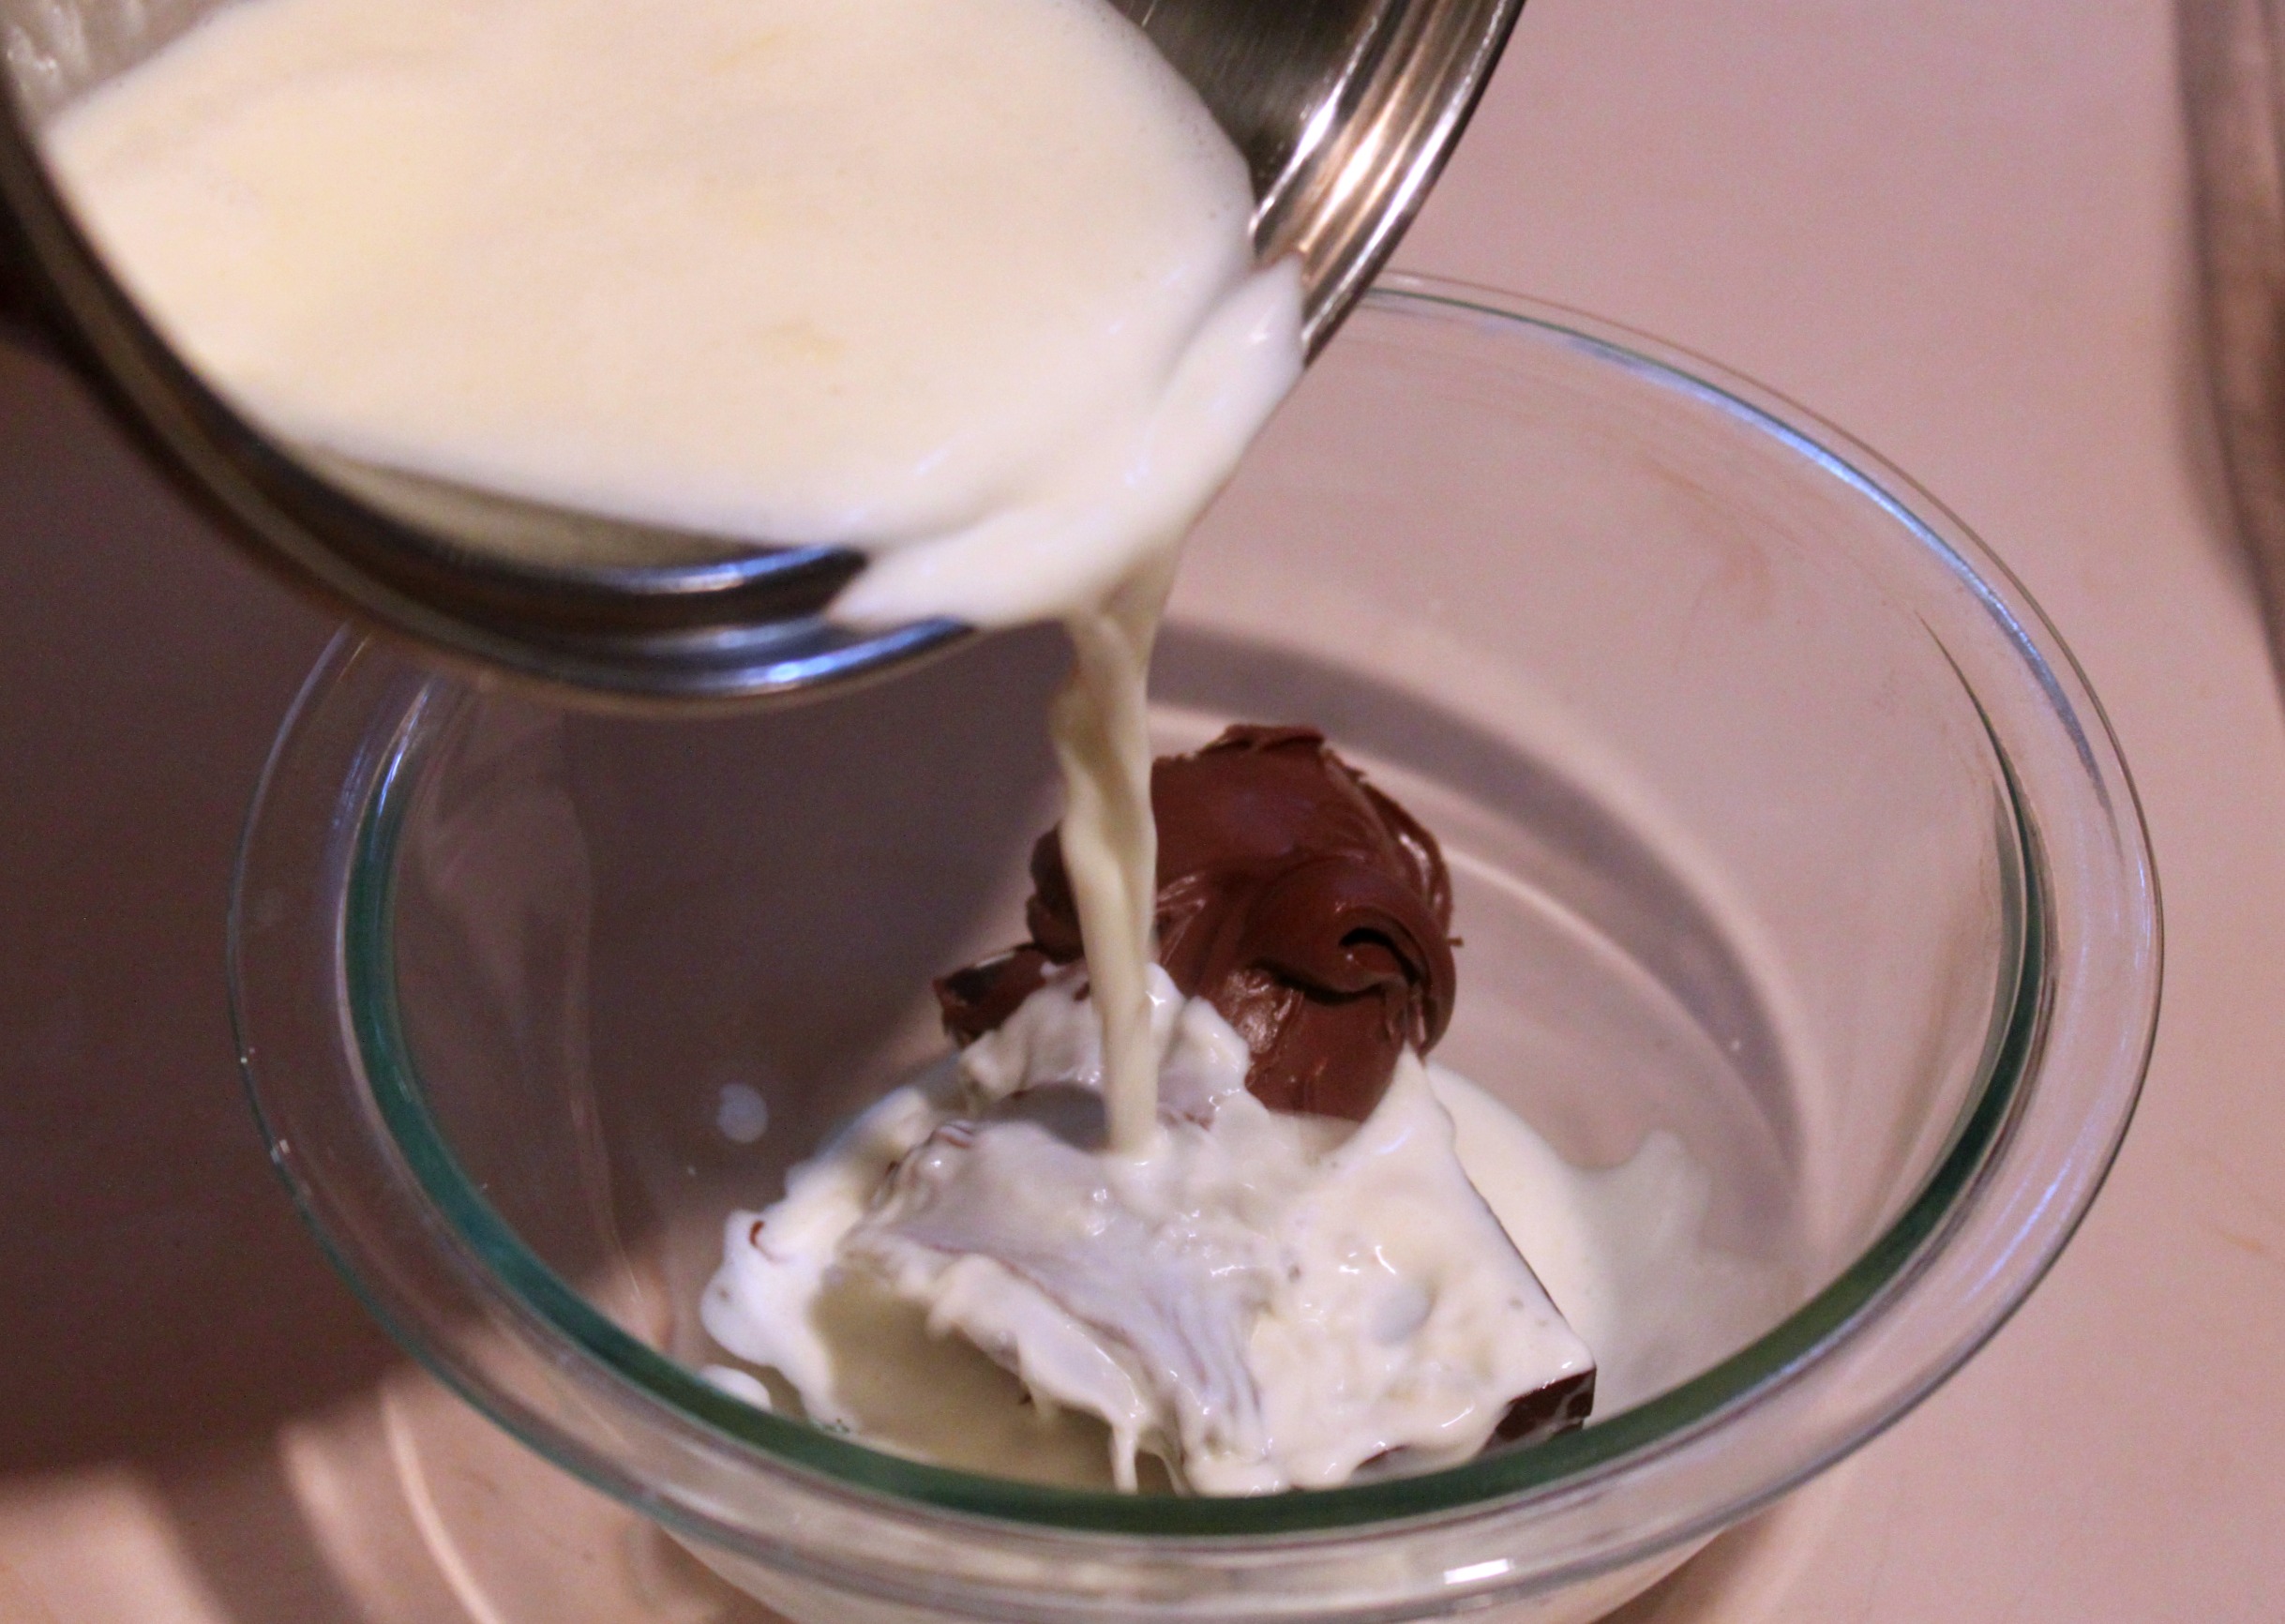 Pour warm cream over Nutella and chocolate